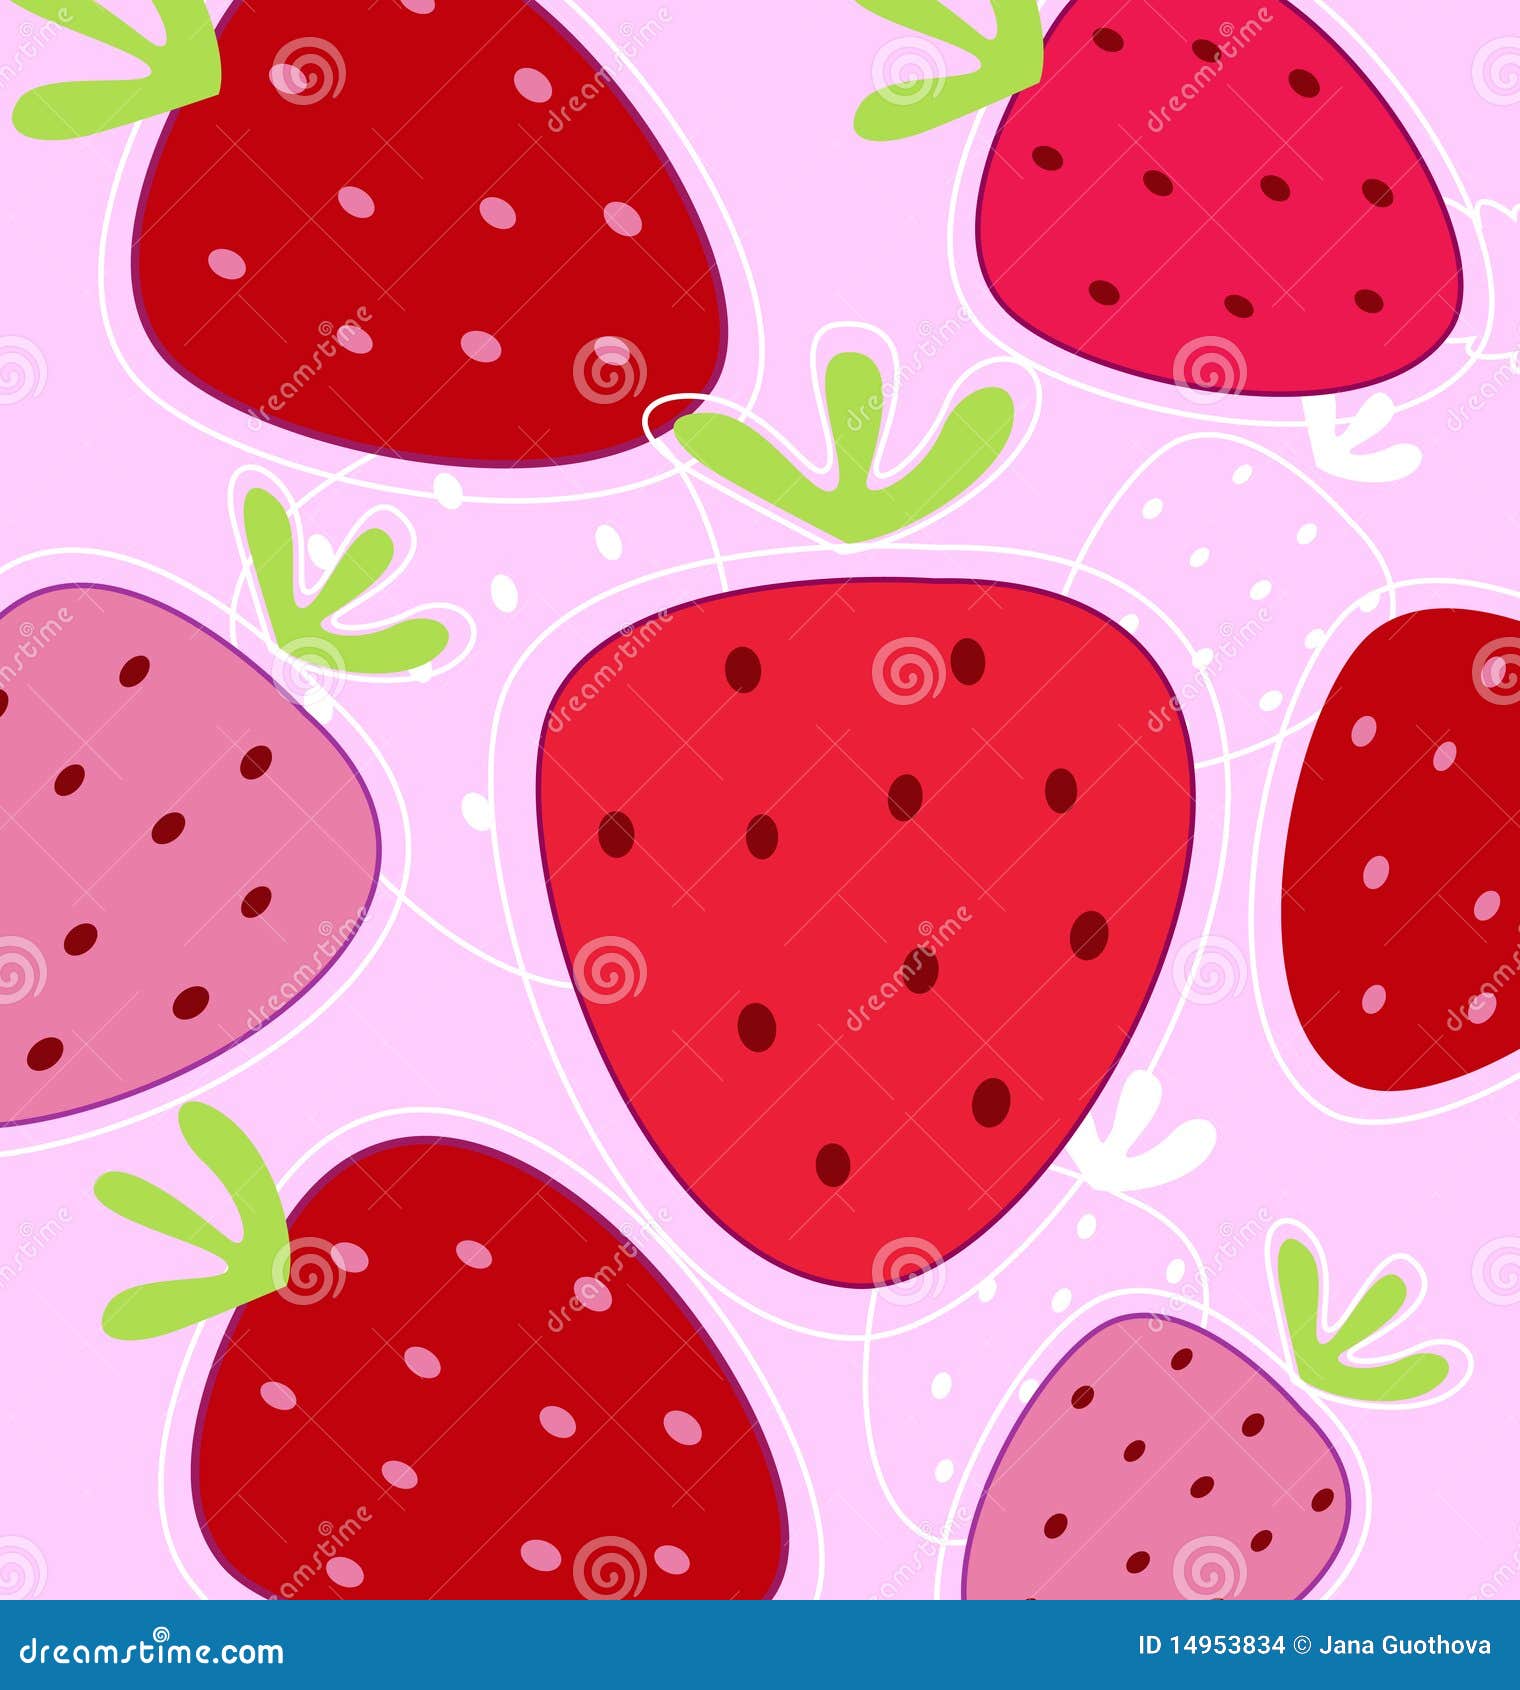 pink strawberry clipart - photo #14